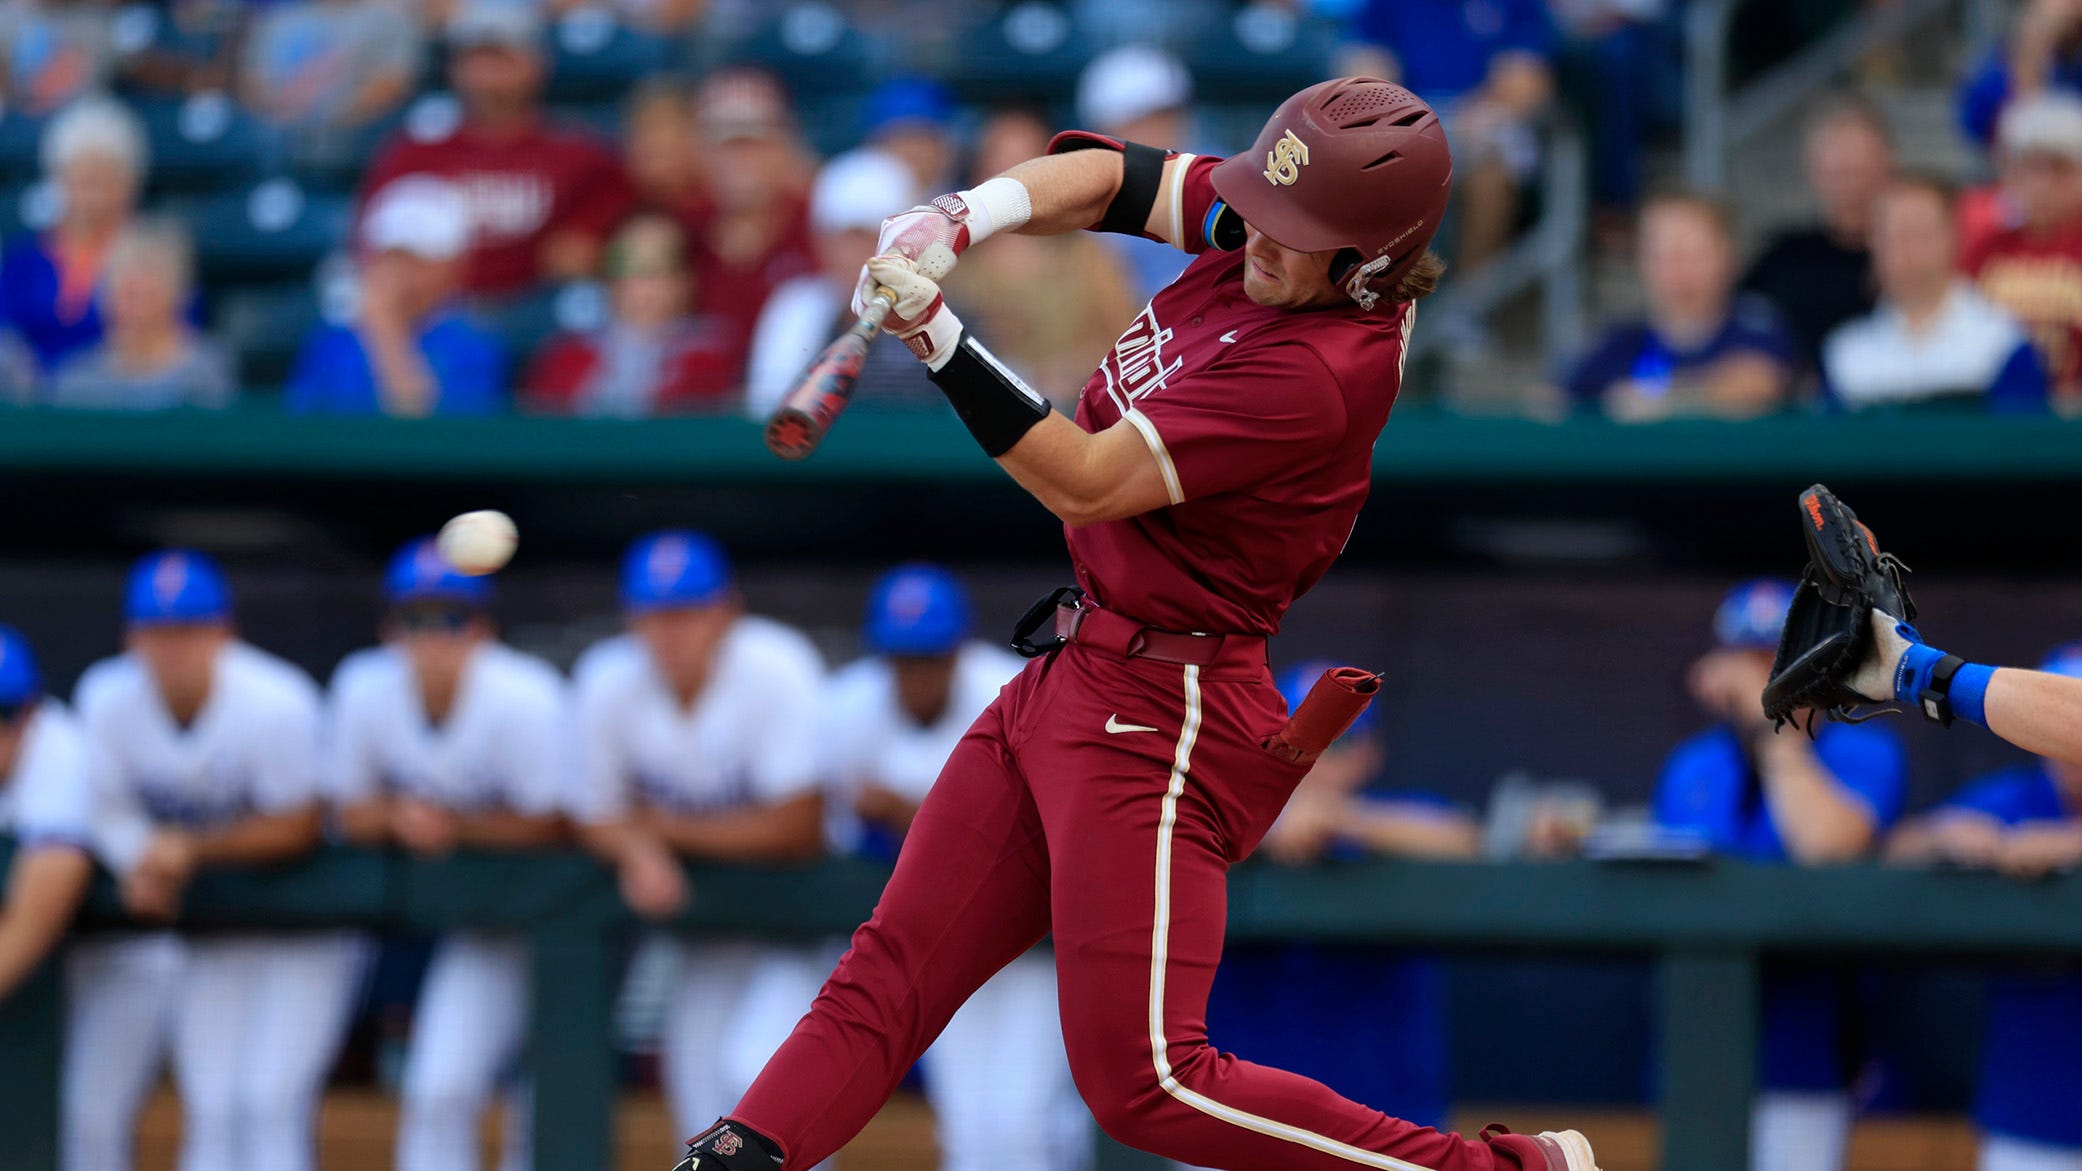   
																FSU vs NC State baseball score updates: Follow live from Friday's ACC game 
															 